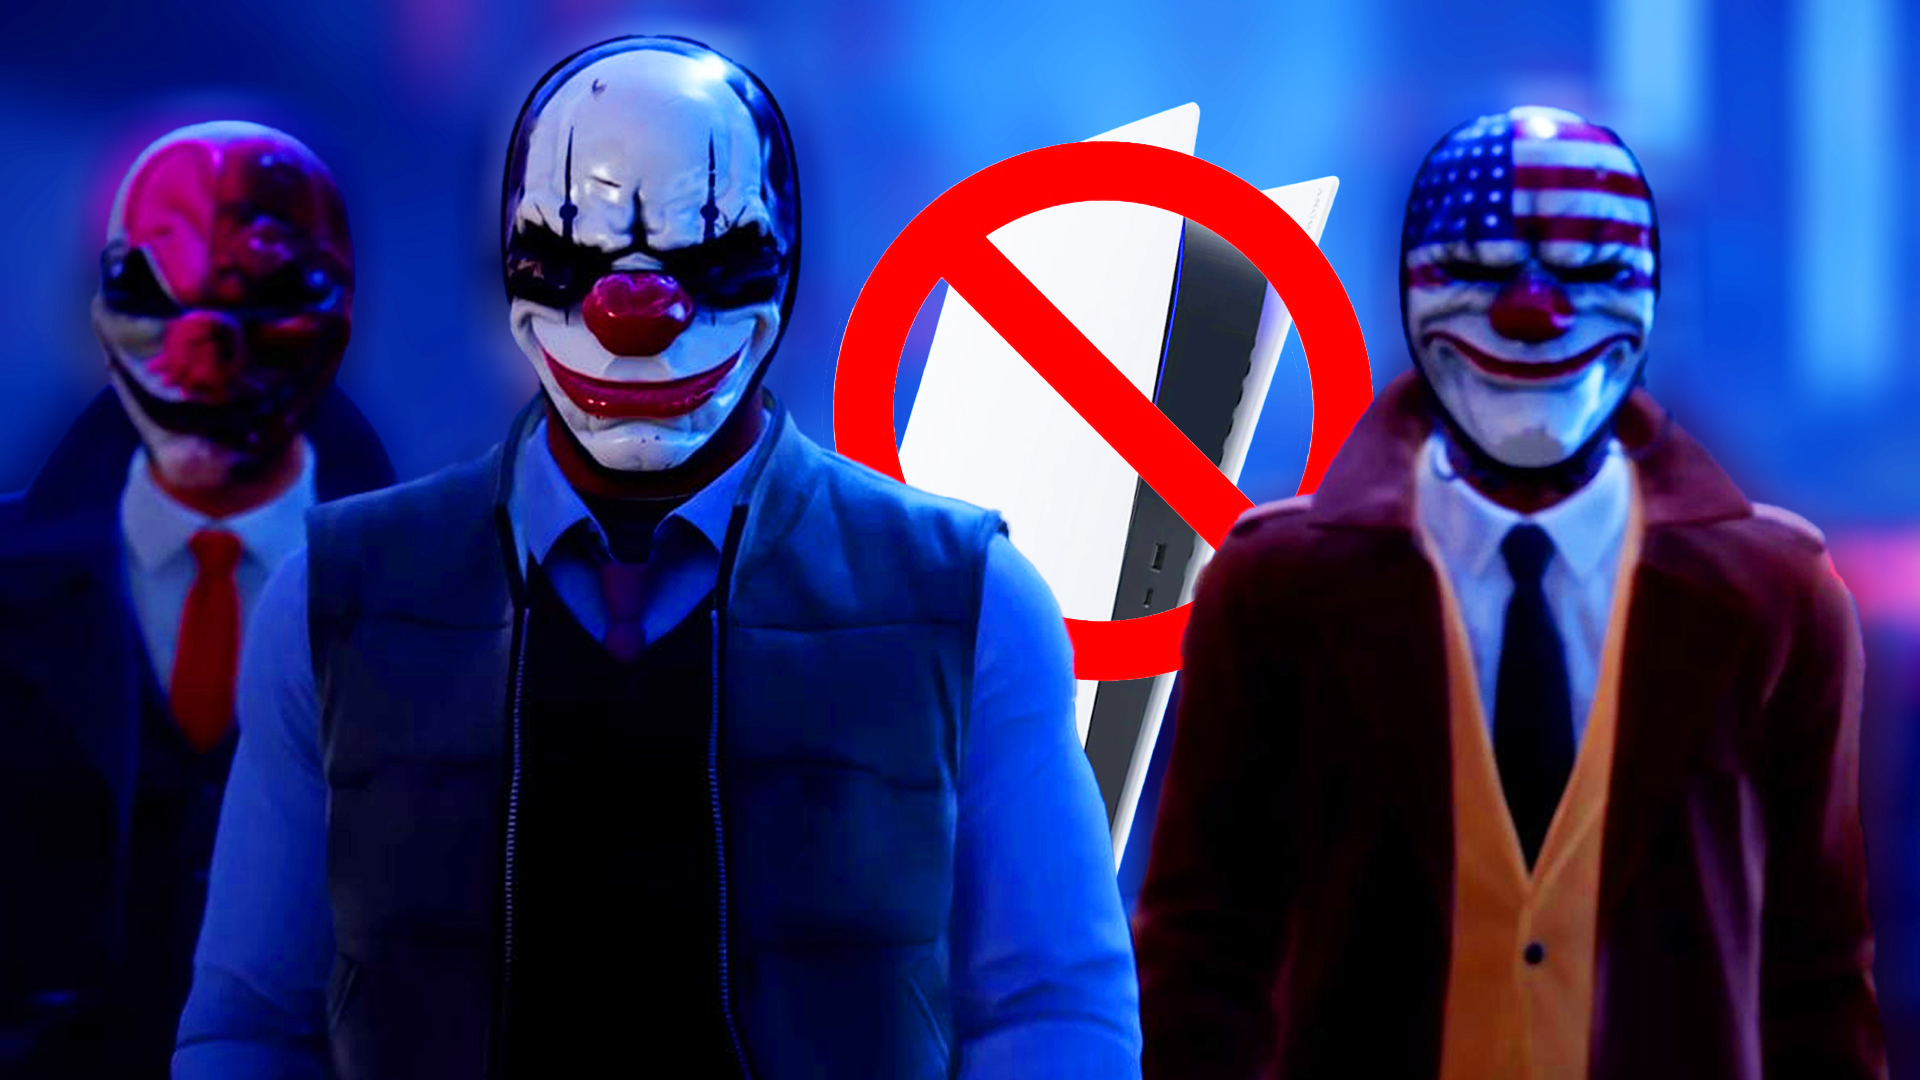 PAYDAY 3 Final Beta, Coming to Xbox Game Pass